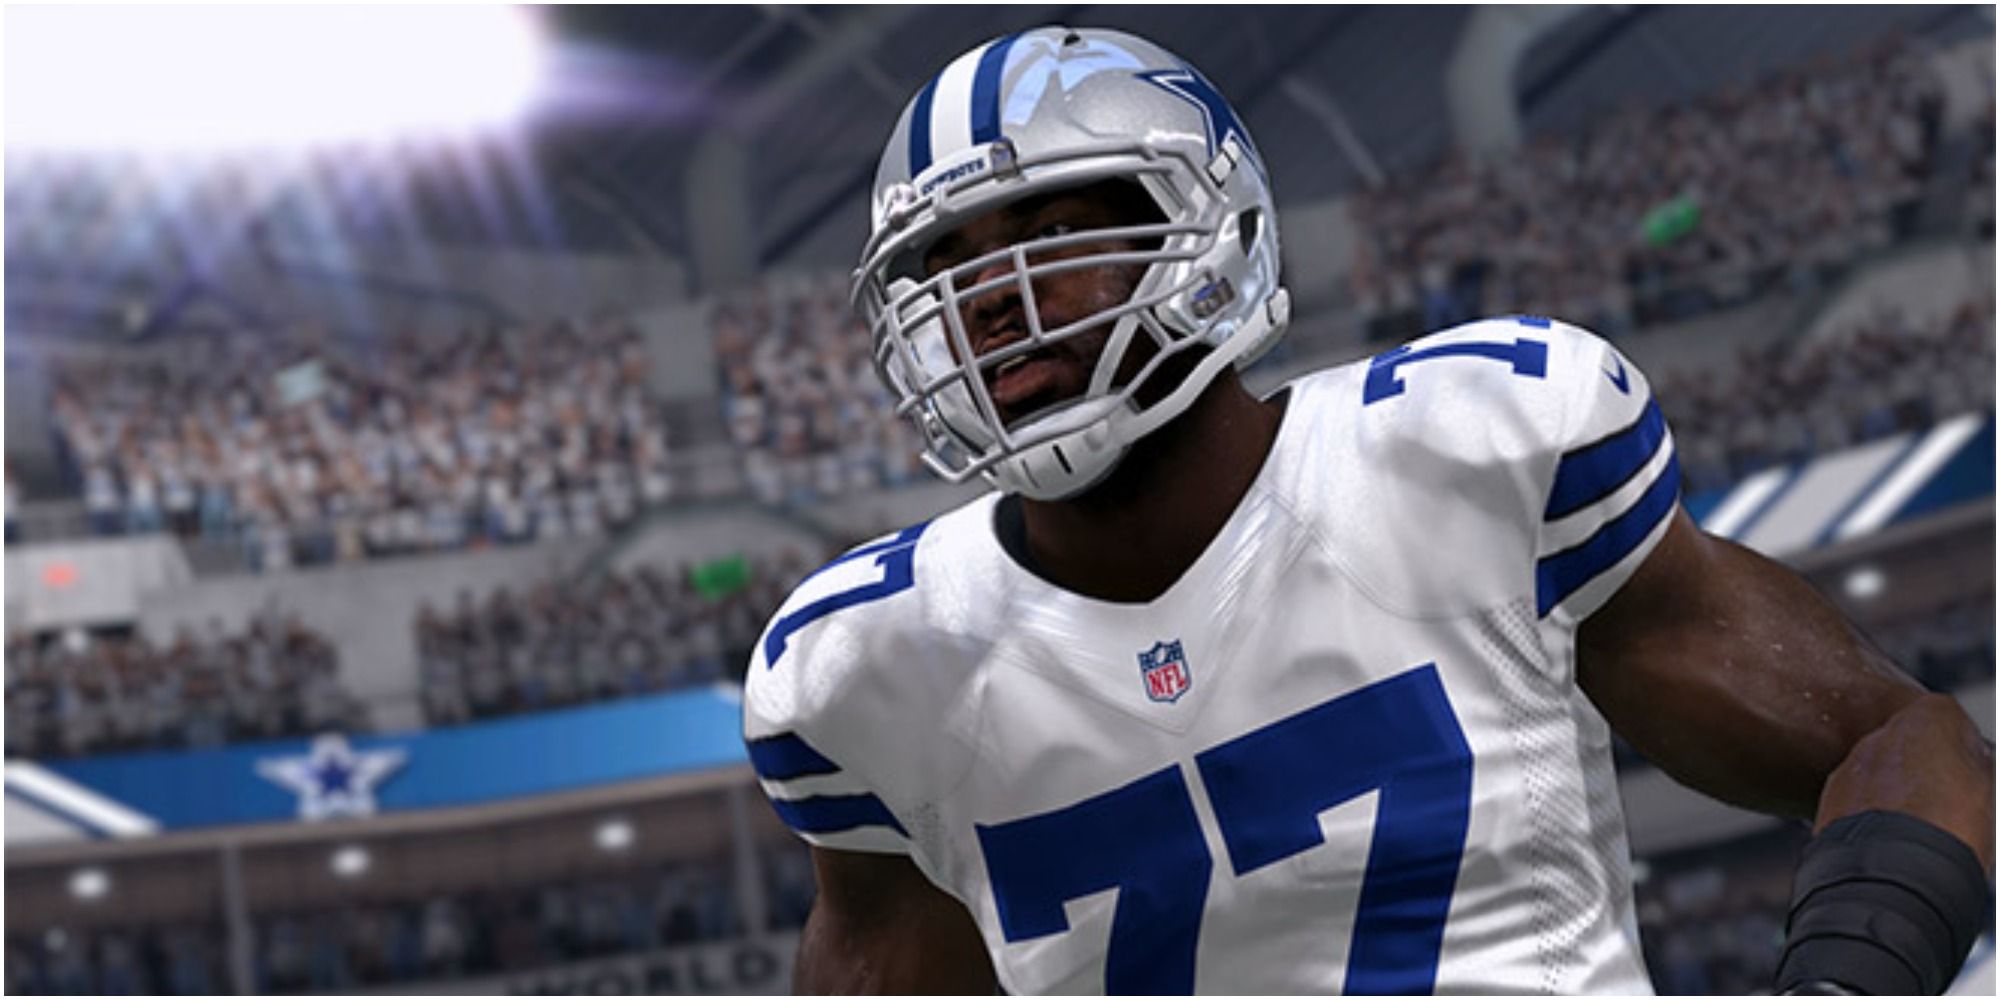 Madden NFL 22 Tyron Smith Heading Into Position At Home